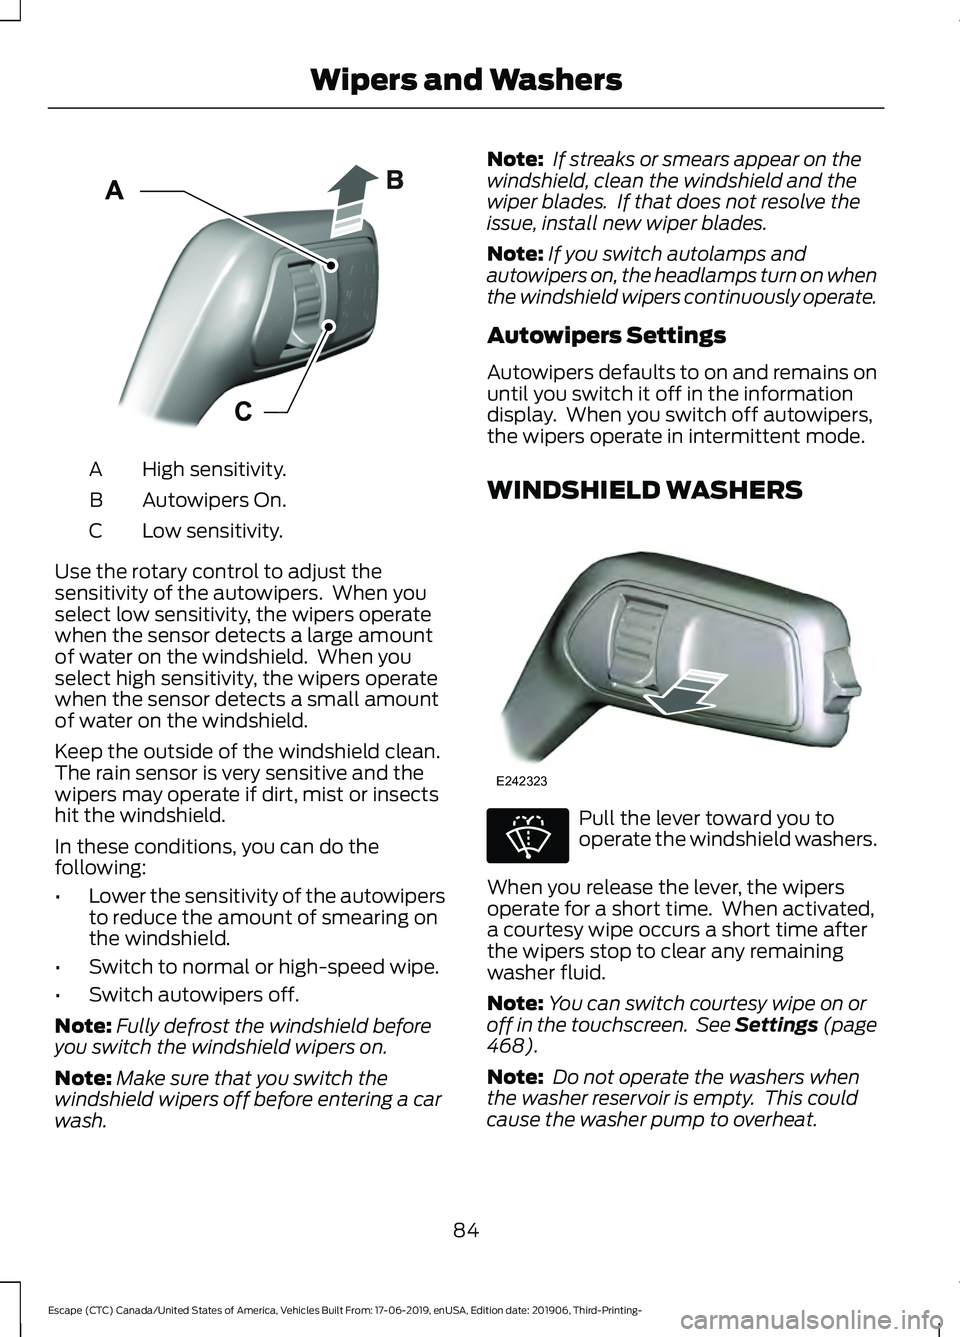 FORD ESCAPE 2020  Owners Manual High sensitivity.
A
Autowipers On.
B
Low sensitivity.
C
Use the rotary control to adjust the
sensitivity of the autowipers.  When you
select low sensitivity, the wipers operate
when the sensor detects